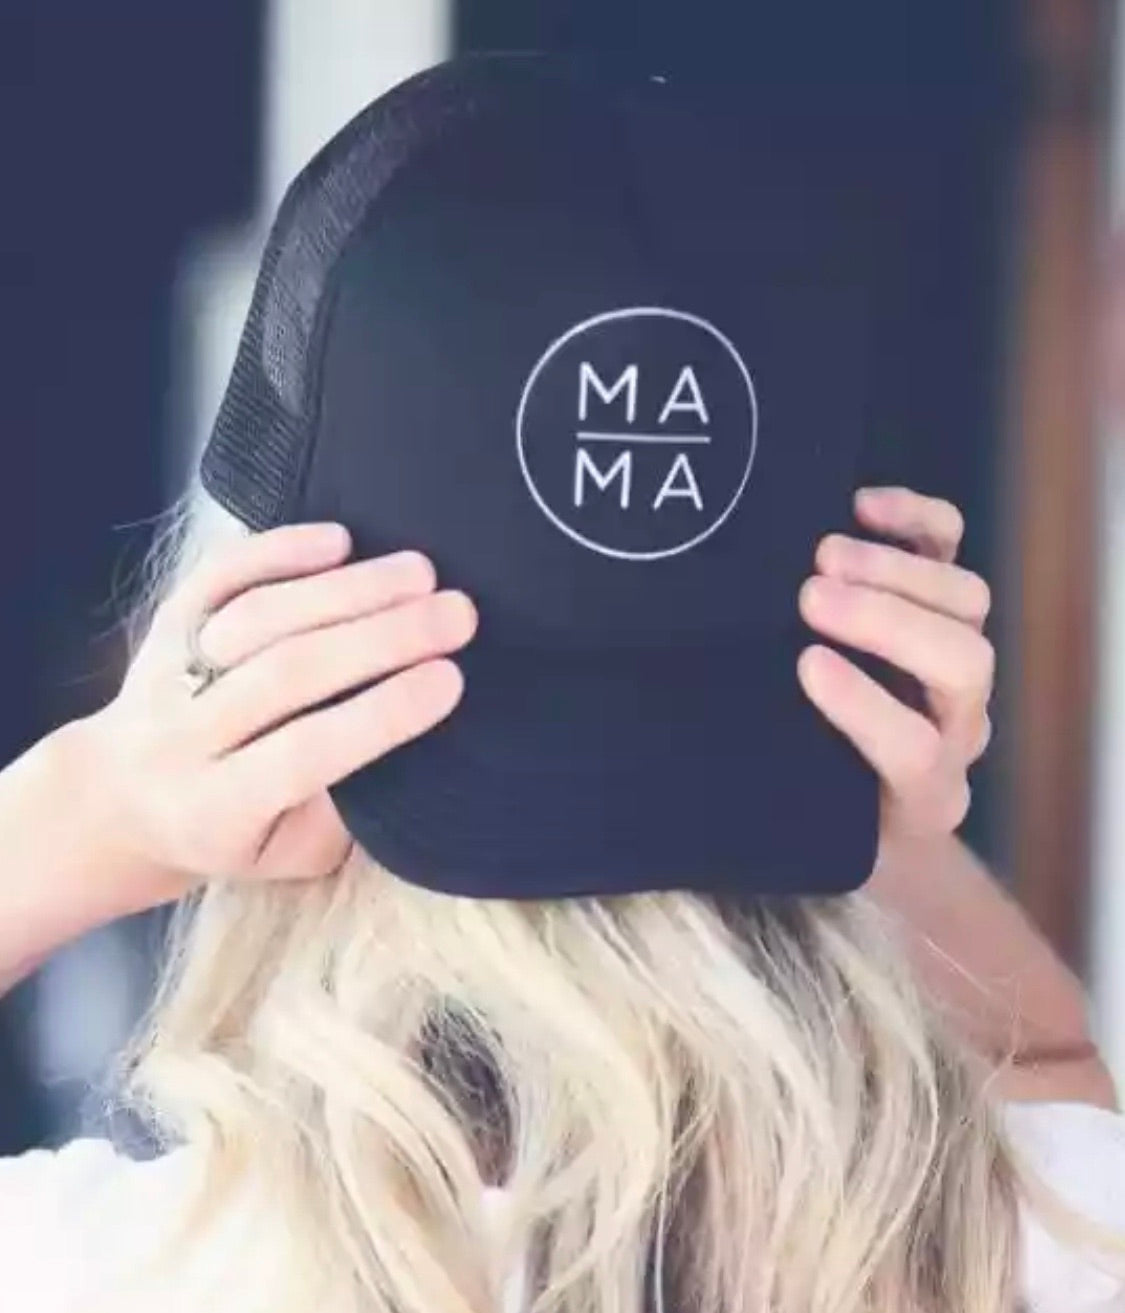 Hats • Mama • Dada • Babe • Trucker hats • Mom hats • Dad hats - Stacy's Pink Martini Boutique